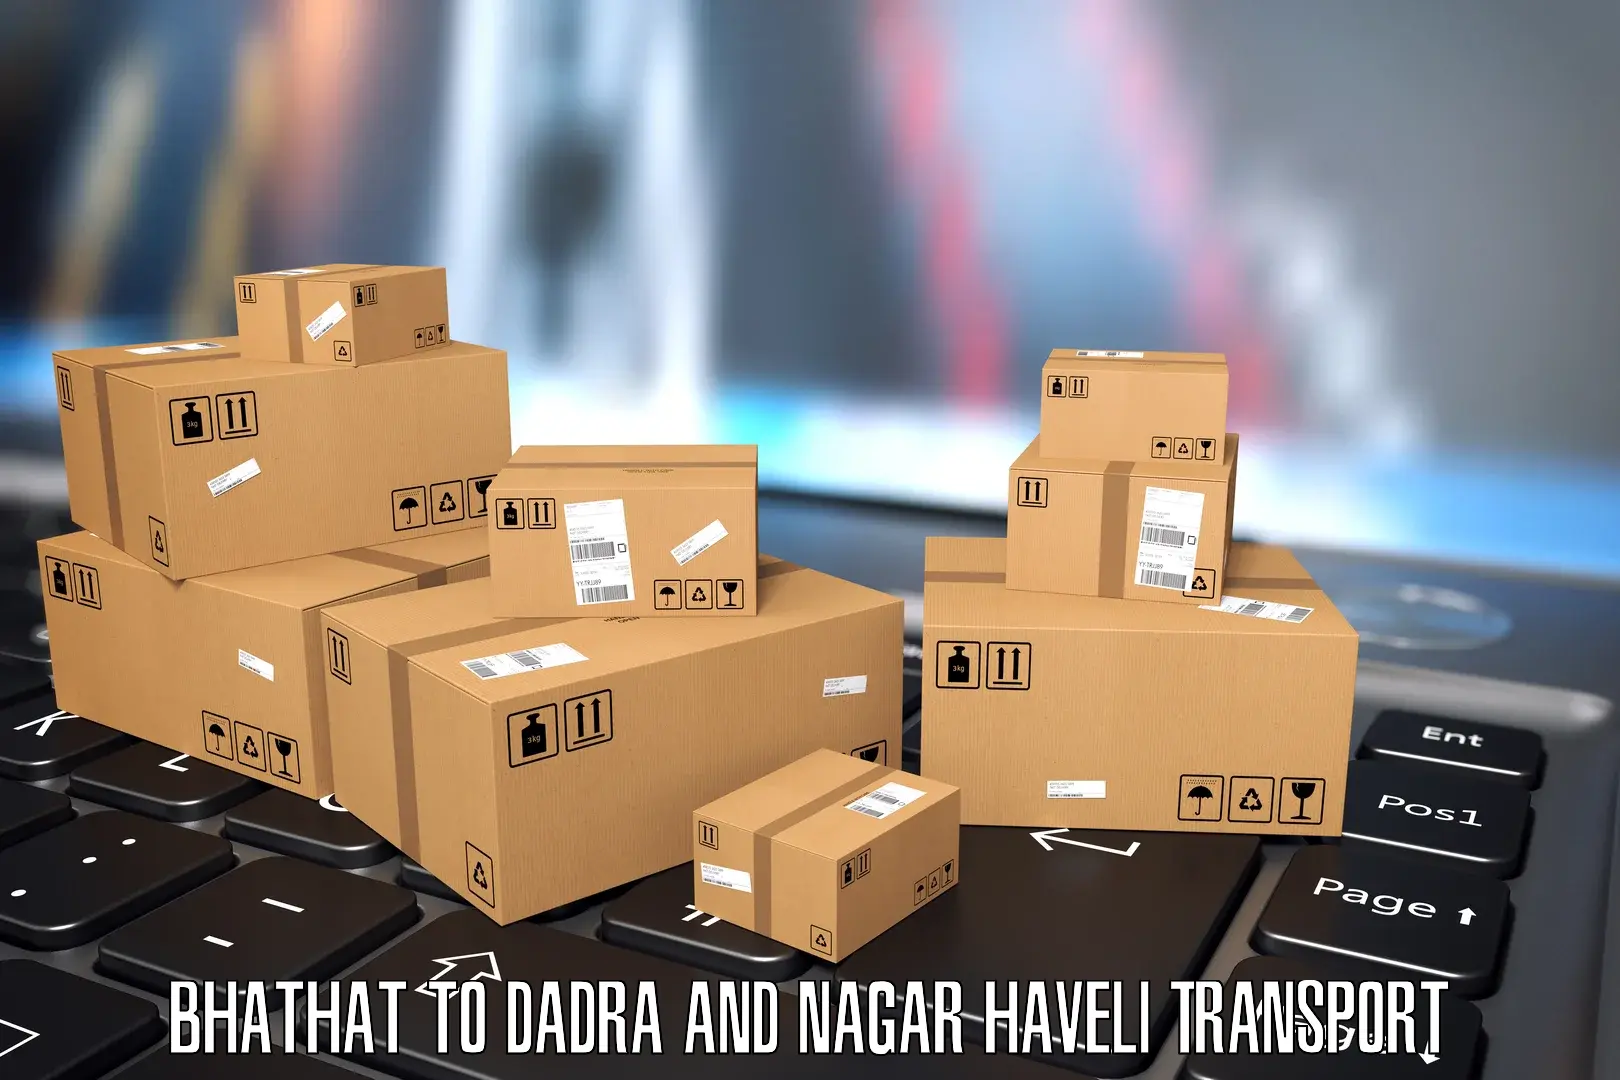 Material transport services Bhathat to Dadra and Nagar Haveli